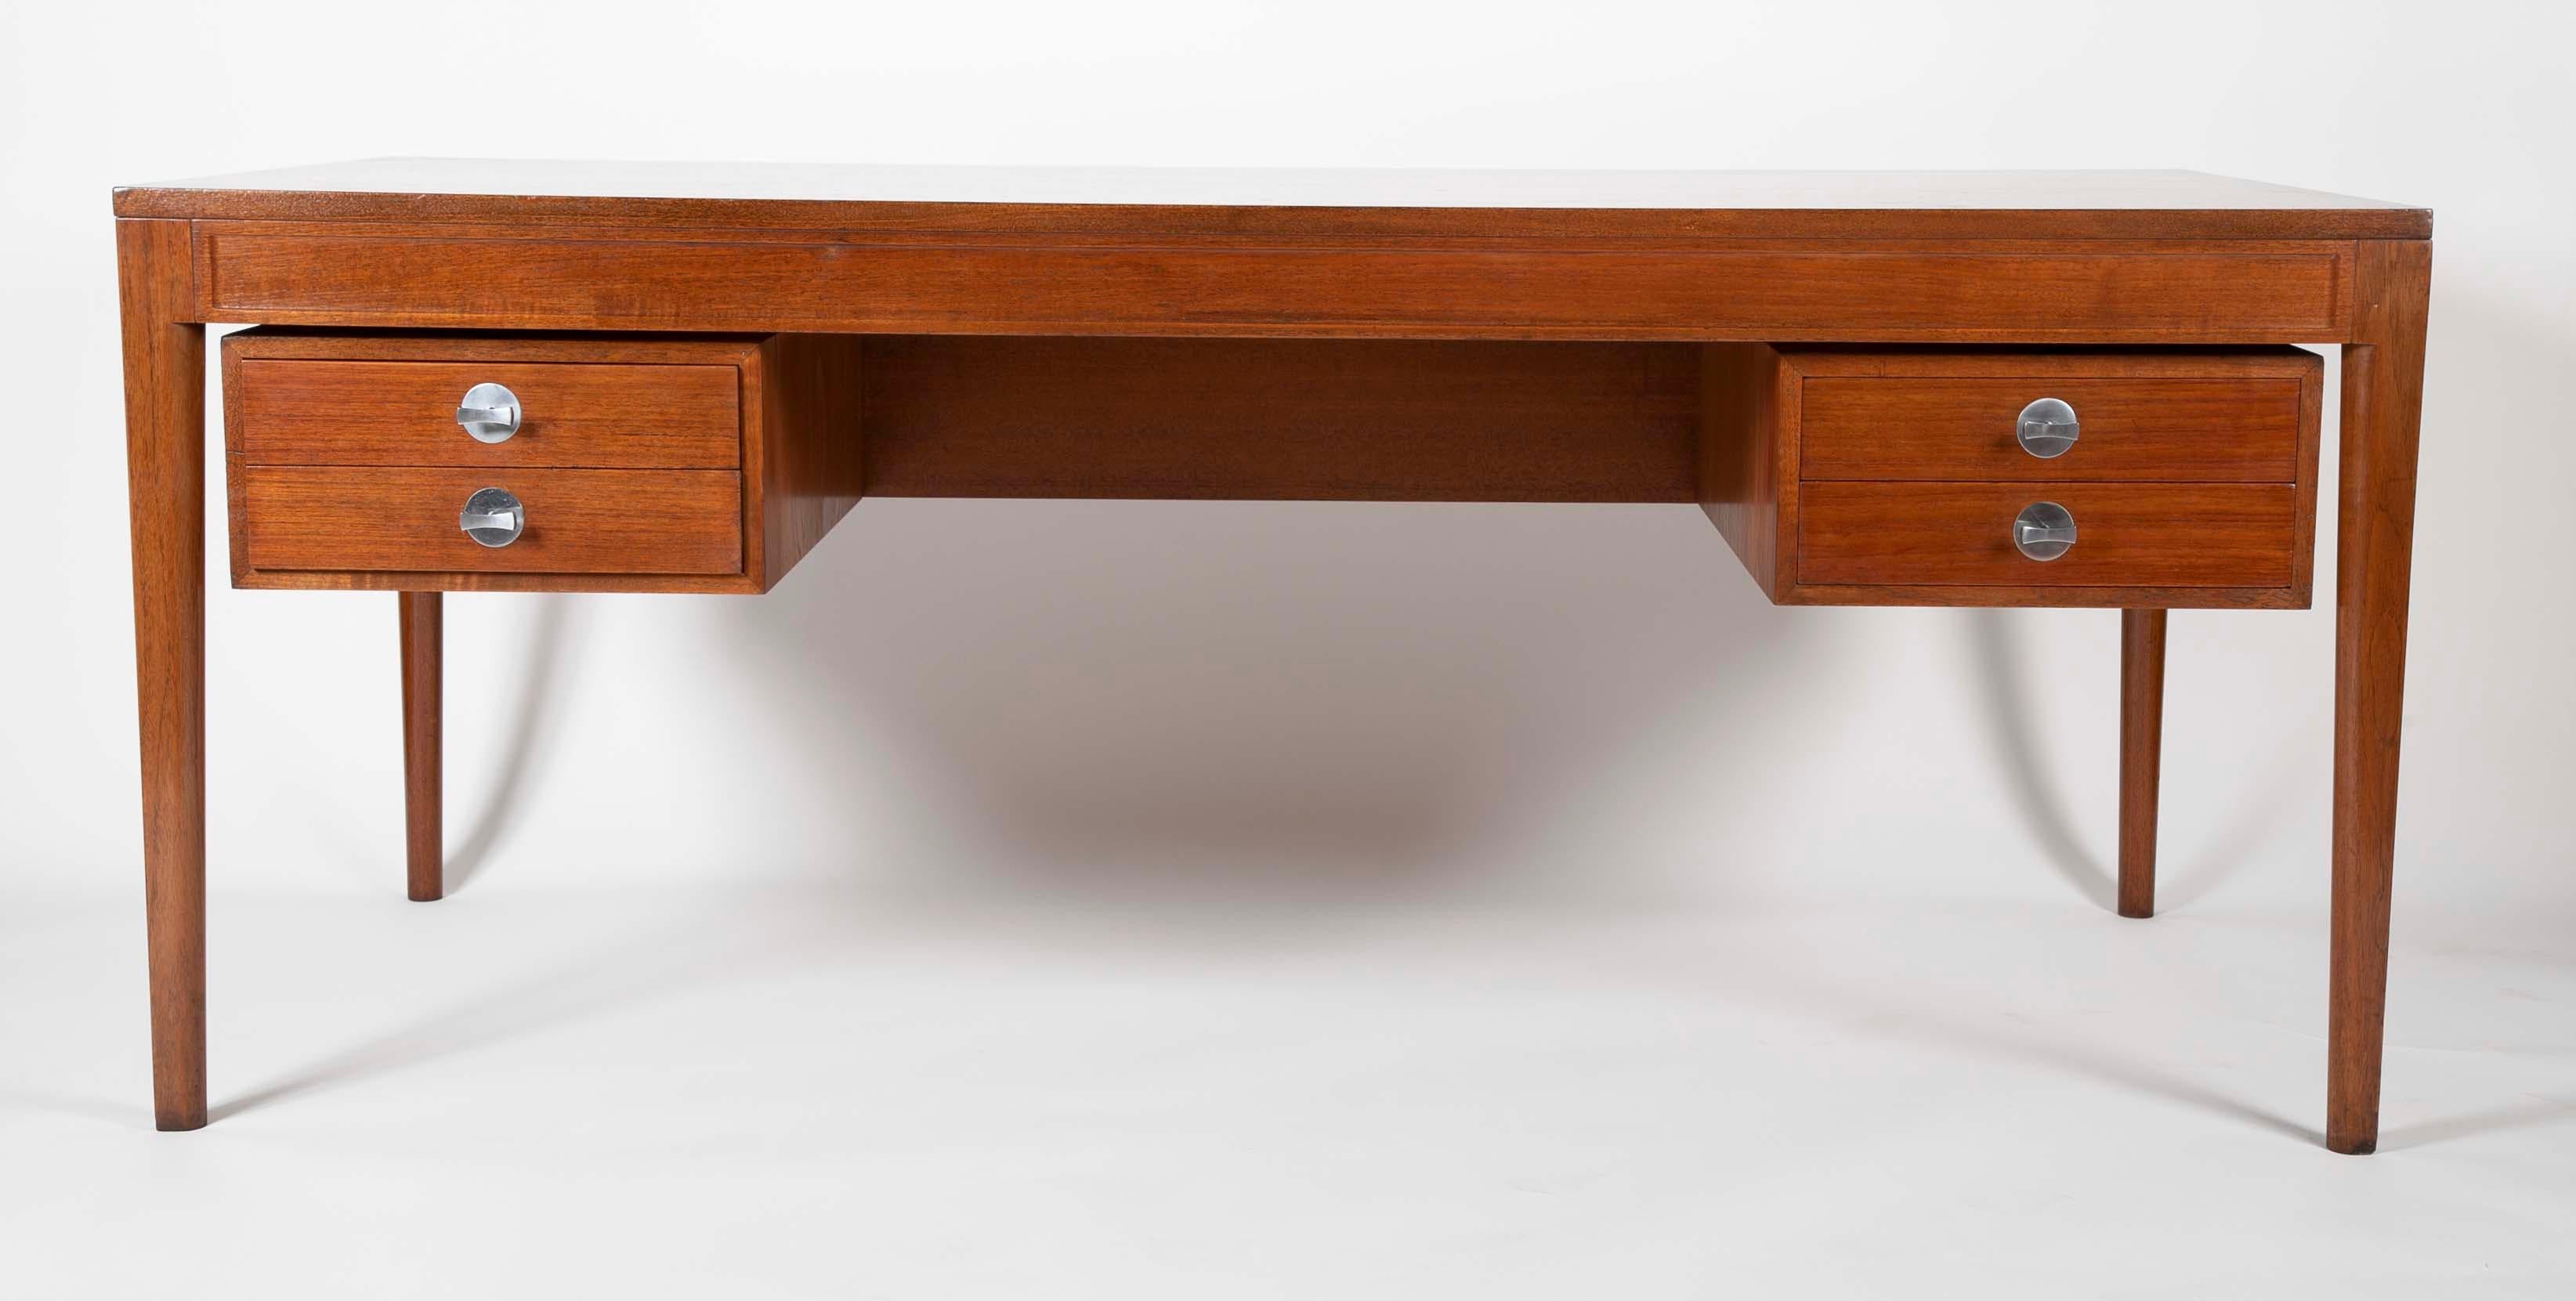 A distinctive looking teak desk with brushed aluminum hardware; the Diplomat desk designed by Finn Juhl in 1958 is anything but Bureaucratic. The quality standards of this desk are of the highest degree in keeping with Finn Juhls enduring reputation